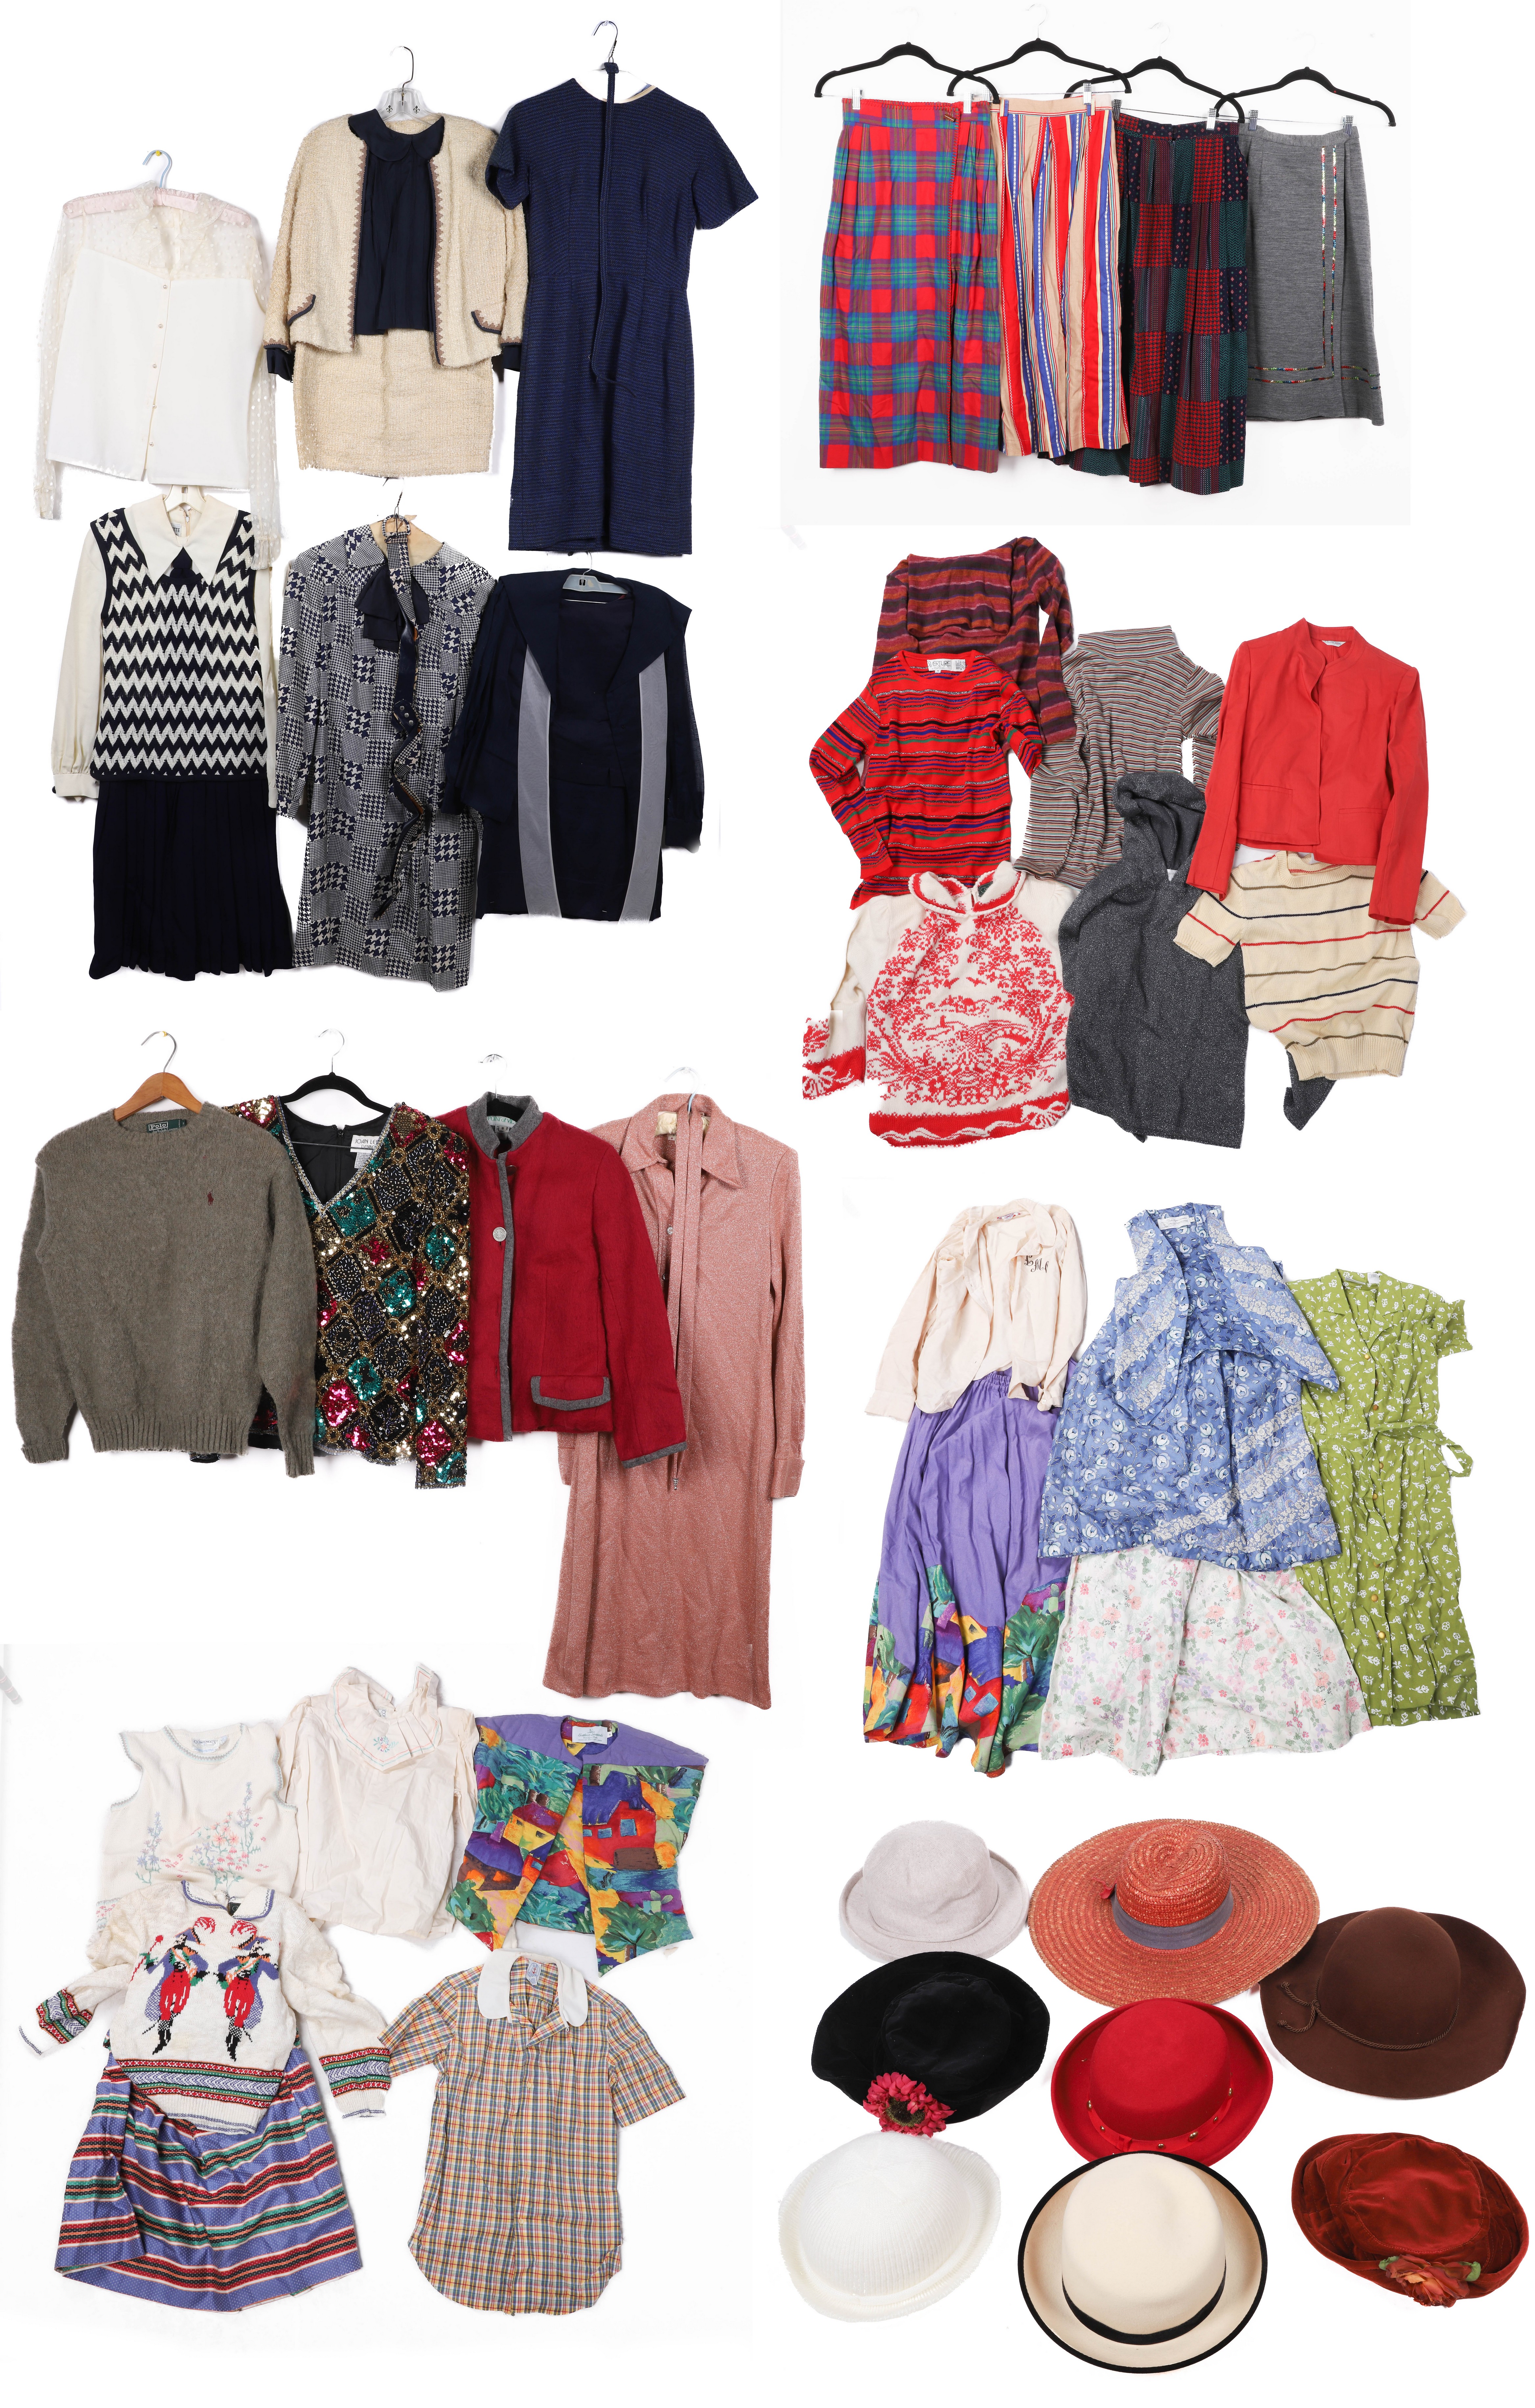 Large vintage clothing group including